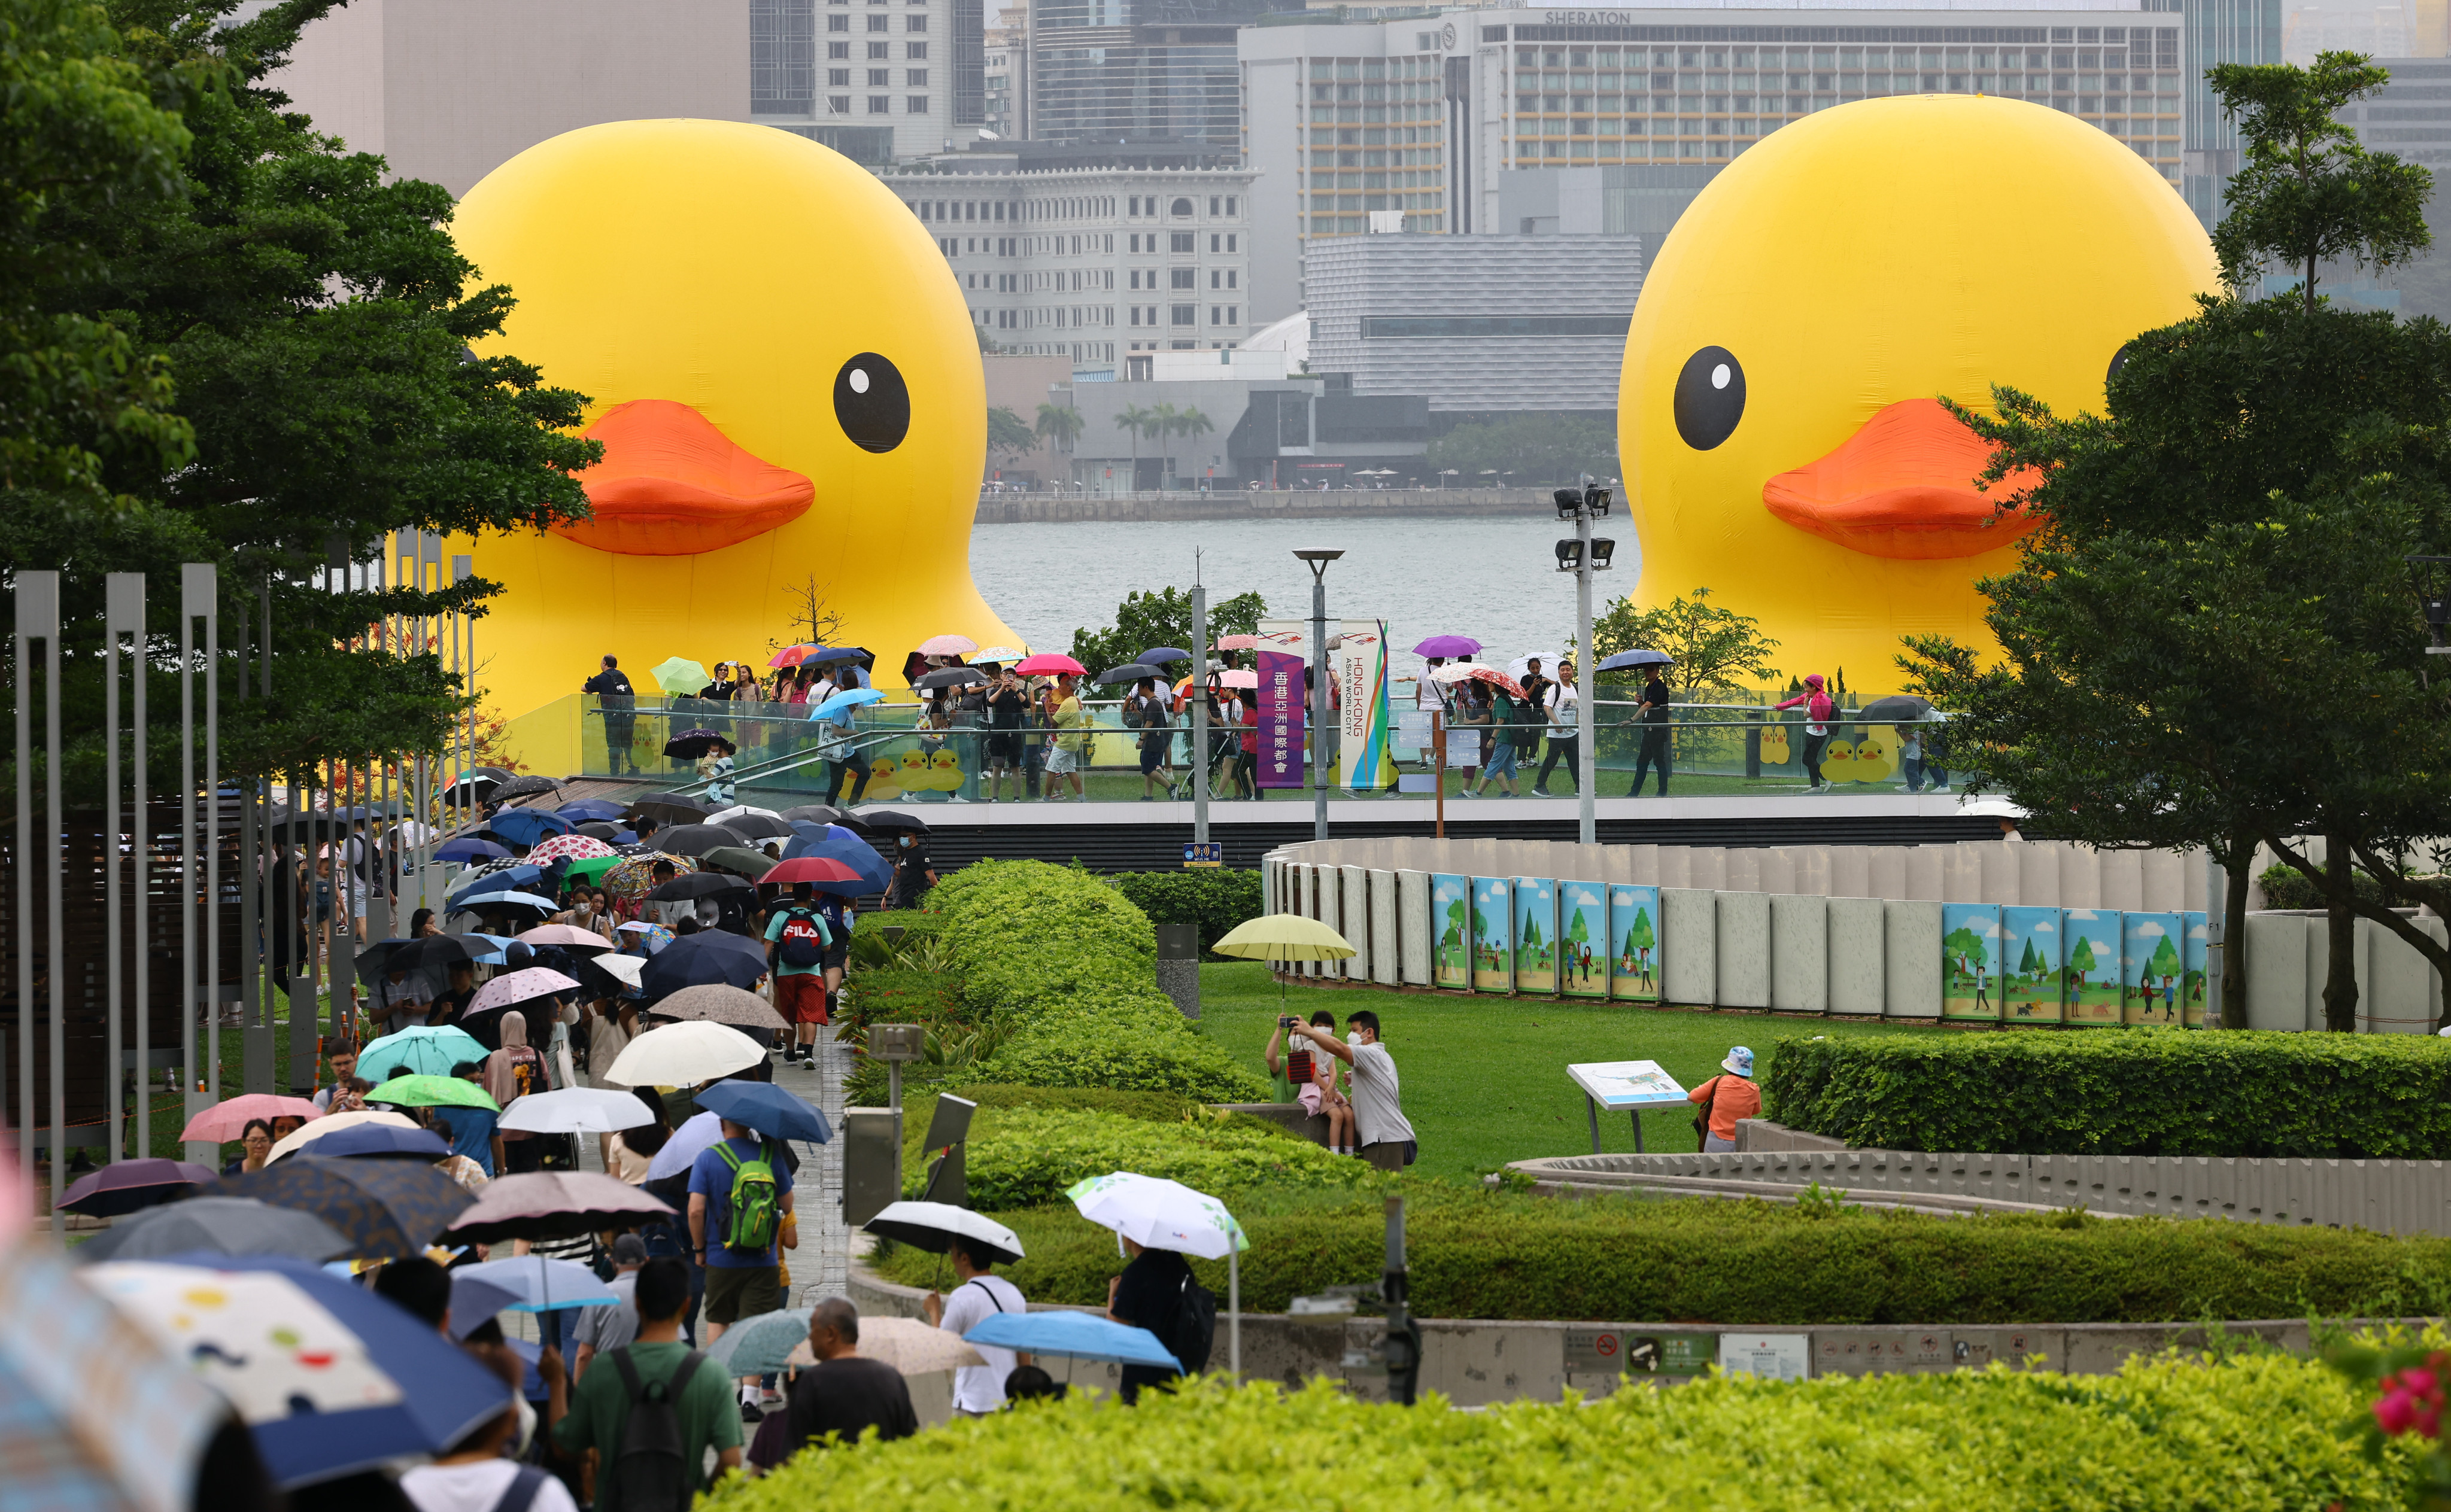 A pair of giant inflatable rubber ducks, created by Florentijn Hofman, visits Hong Kong. Photo: Dickson Lee